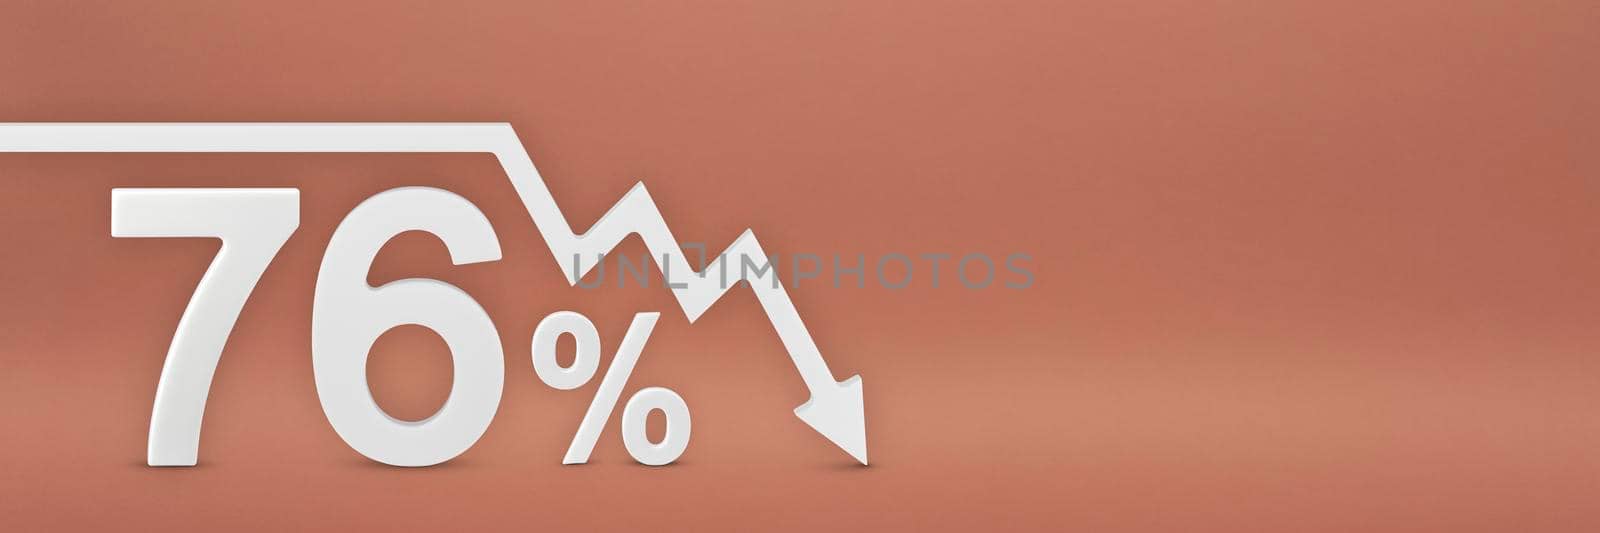 seventy-six percent, the arrow on the graph is pointing down. Stock market crash, bear market, inflation.Economic collapse, collapse of stocks.3d banner,76 percent discount sign on a red background